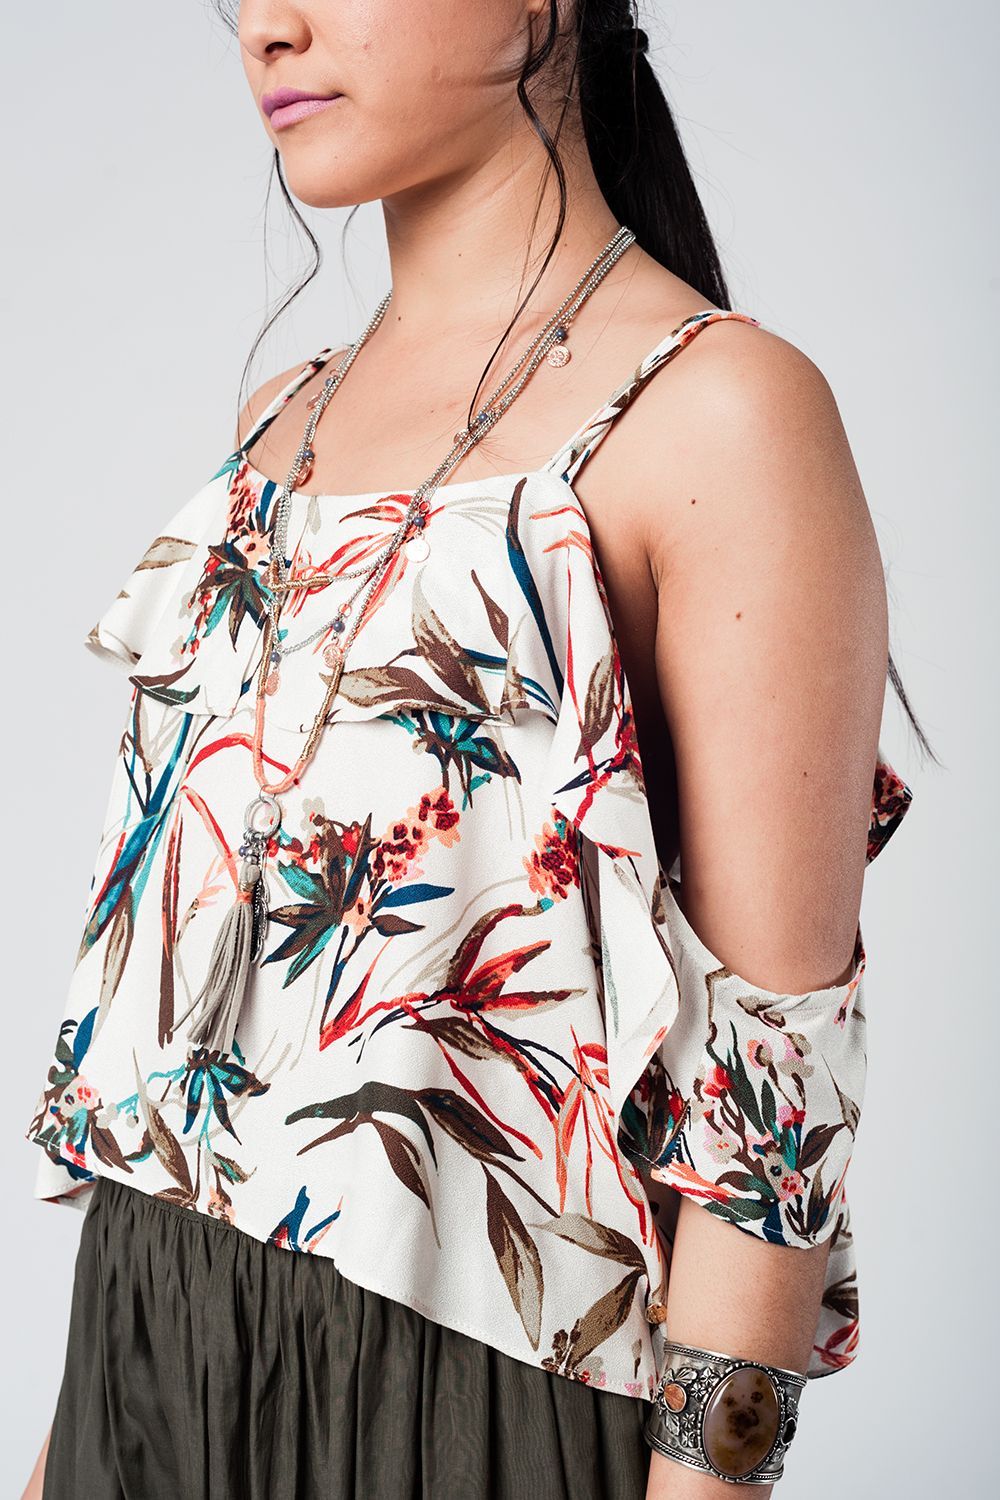 Ecru Top With Cold Shoulder and Leaves Print